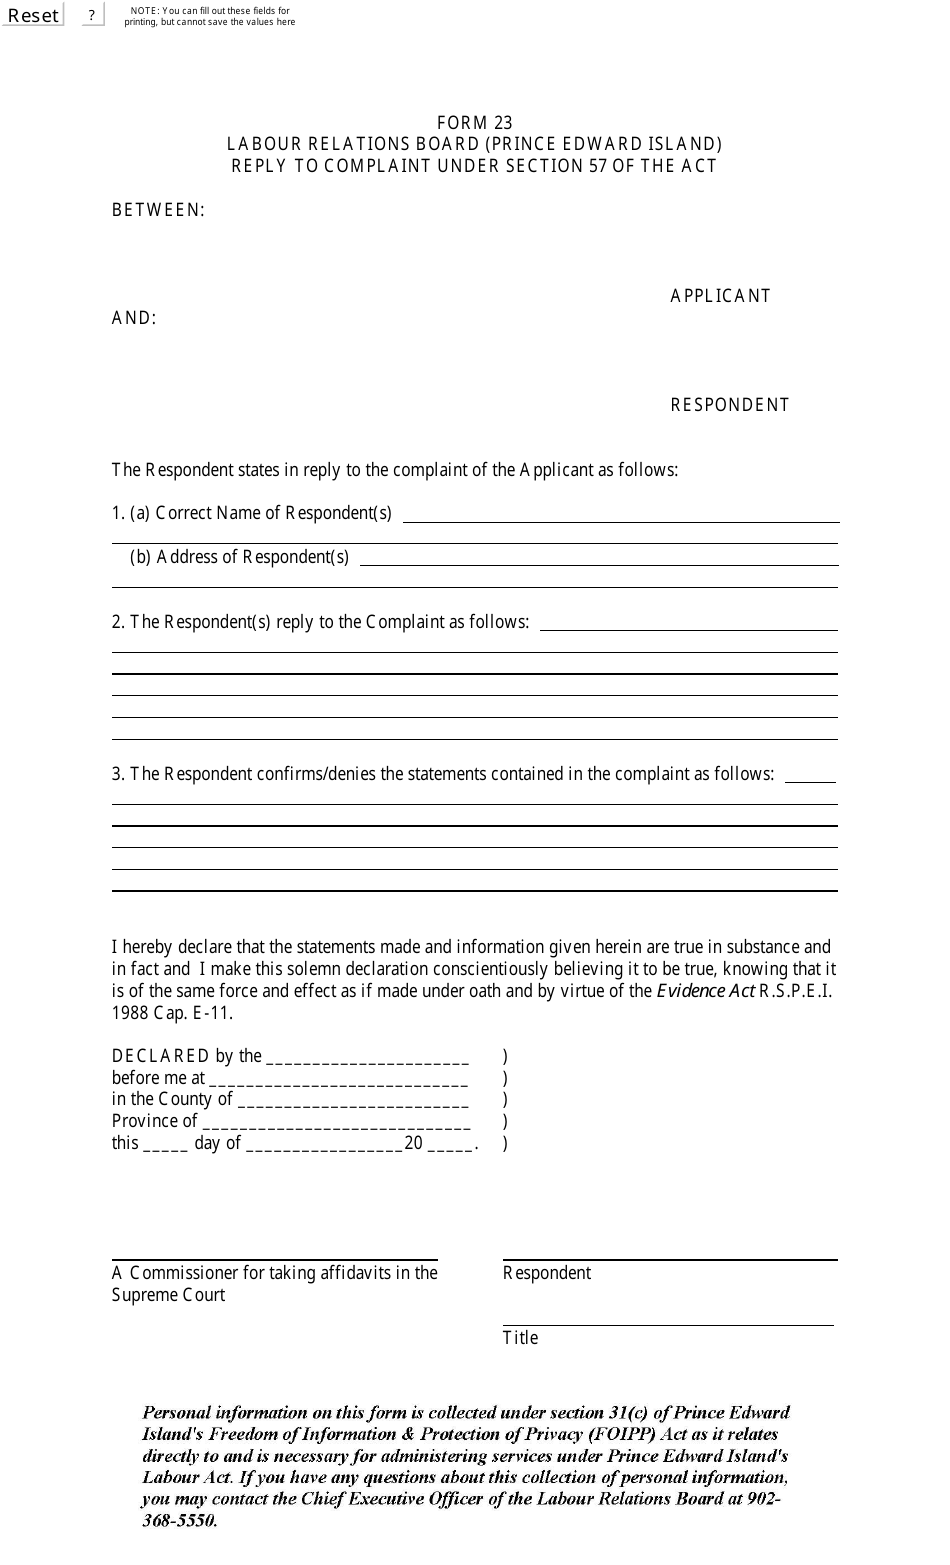 Form 23 Reply to Complaint Under Section 57 of the Act - Prince Edward Island, Canada, Page 1